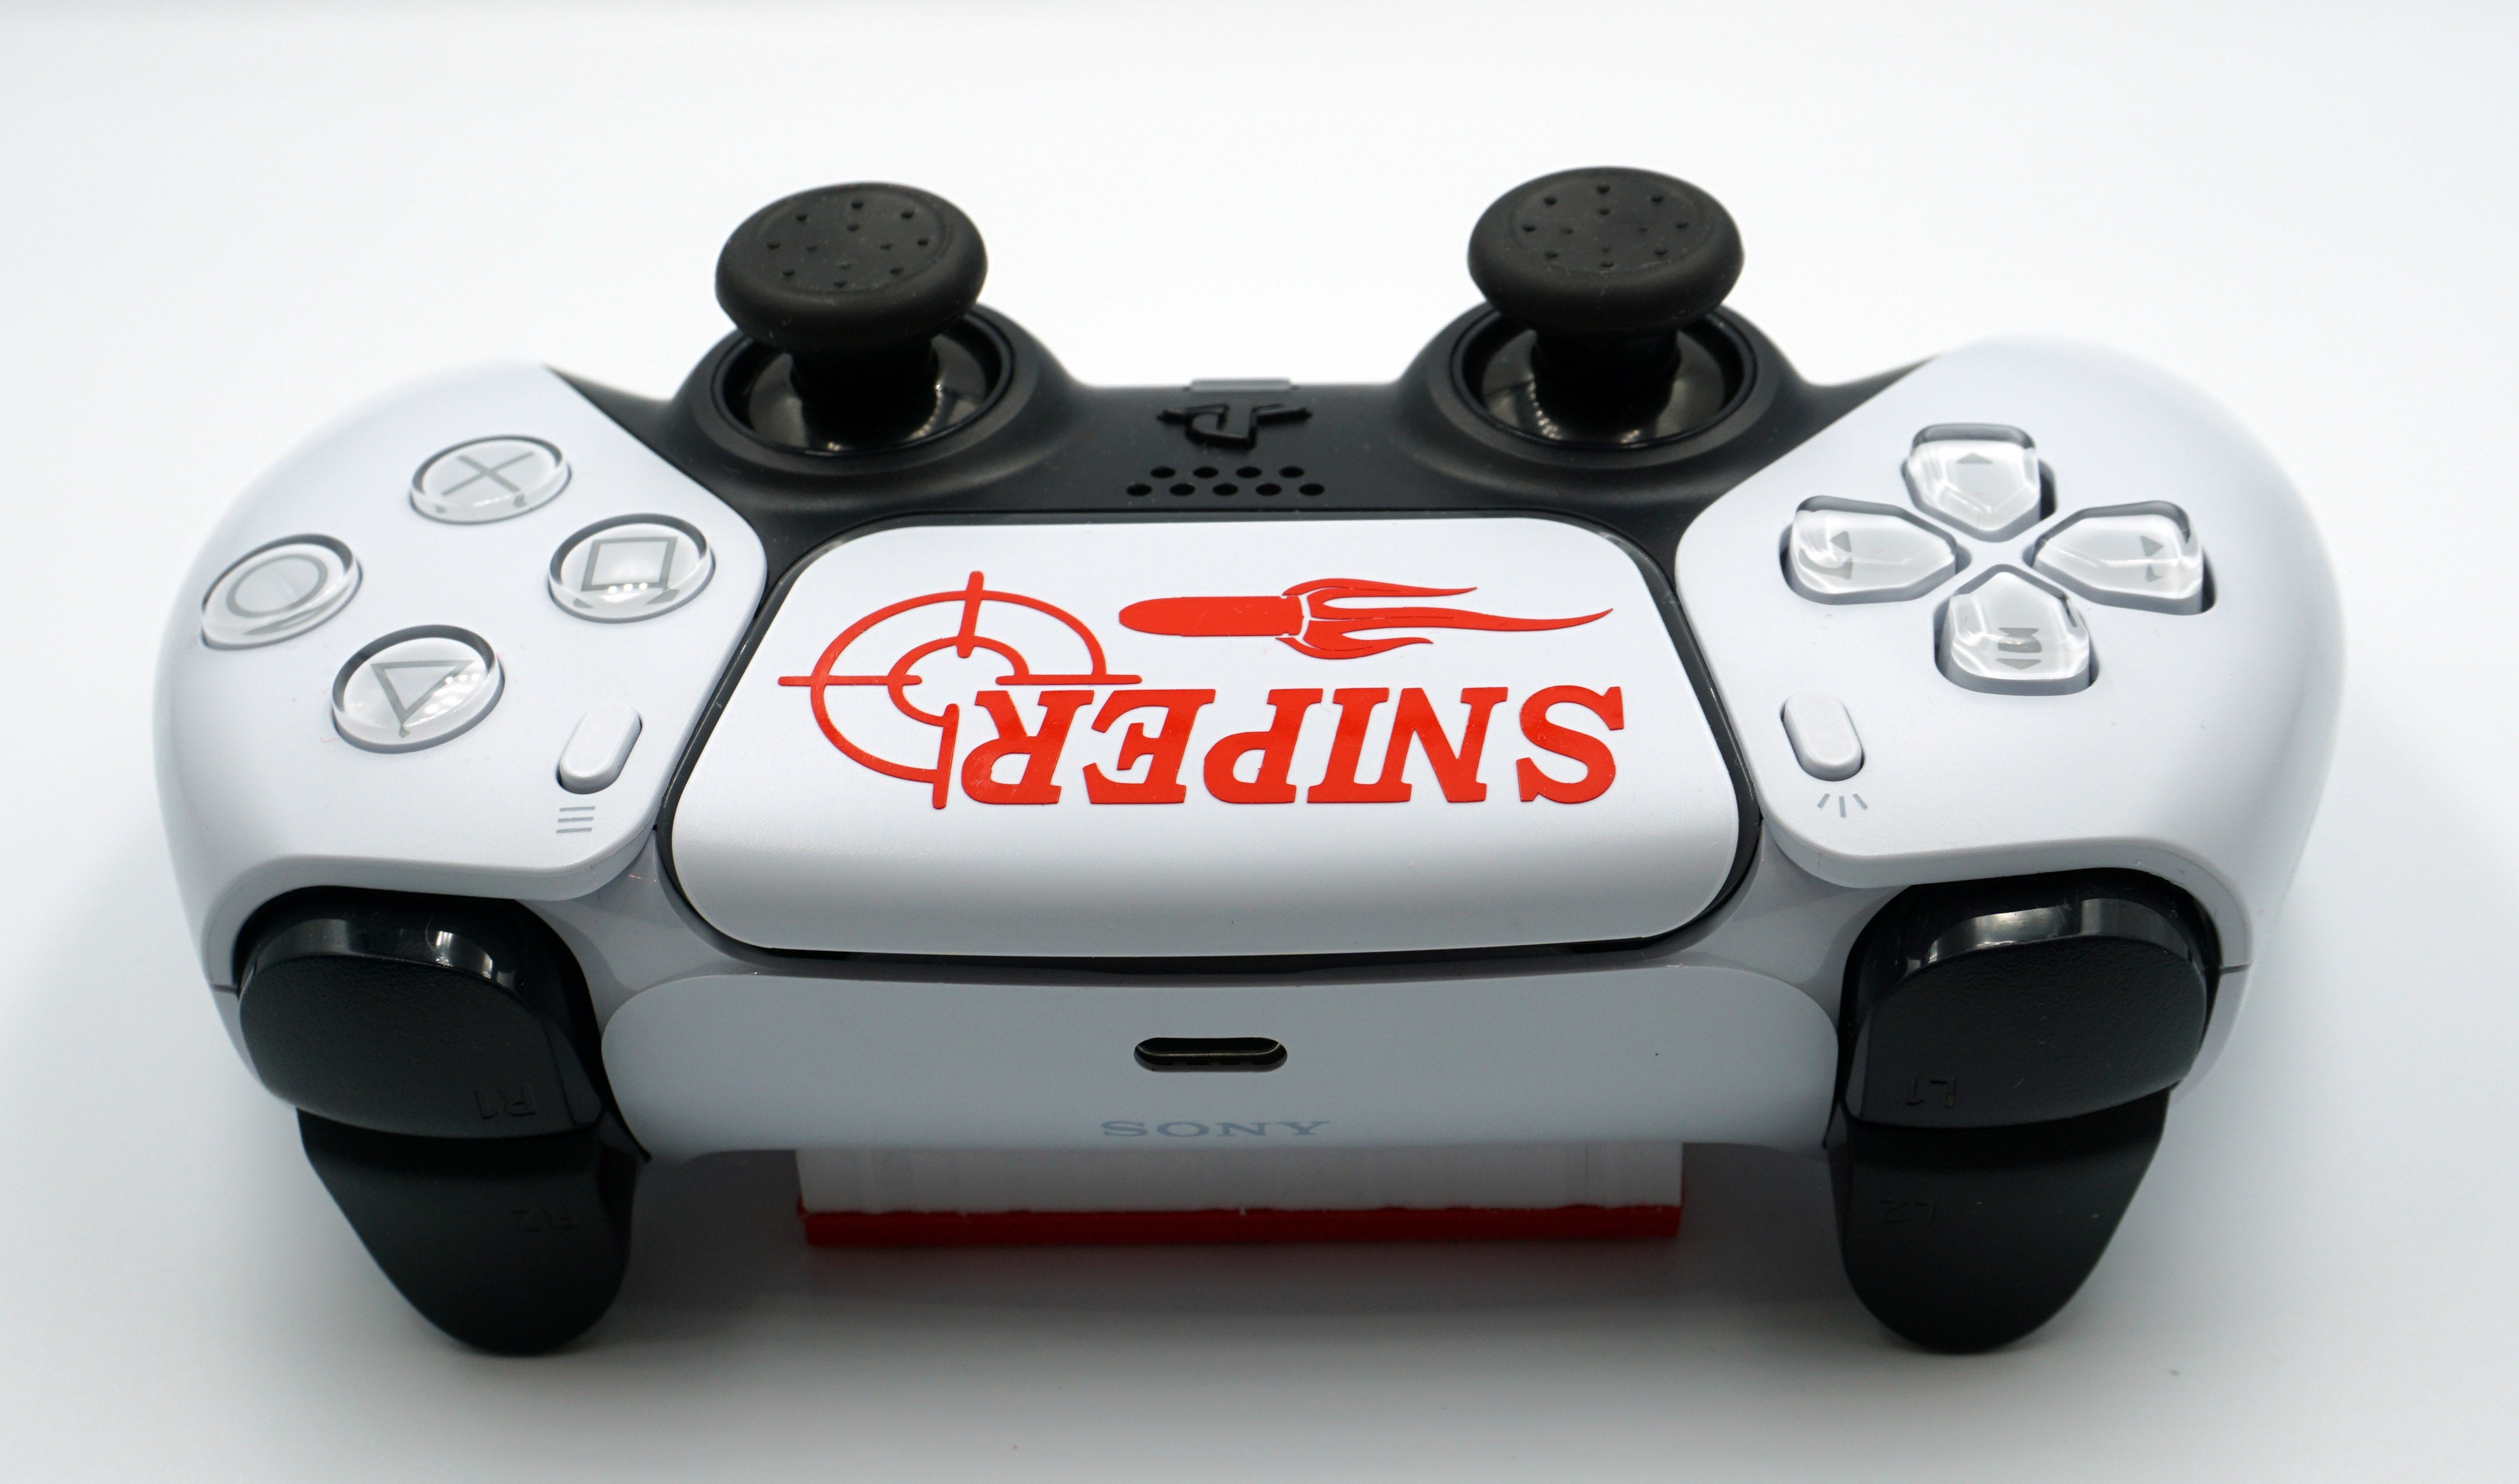 CONTROLLER PROFESSIONALE PS5 NUOVO: SNIPER 2/4 PADDLE / DIGITAL CLICK / CHIP MTS / RAPIDFIRE - CUSTOM TOTALE !!!